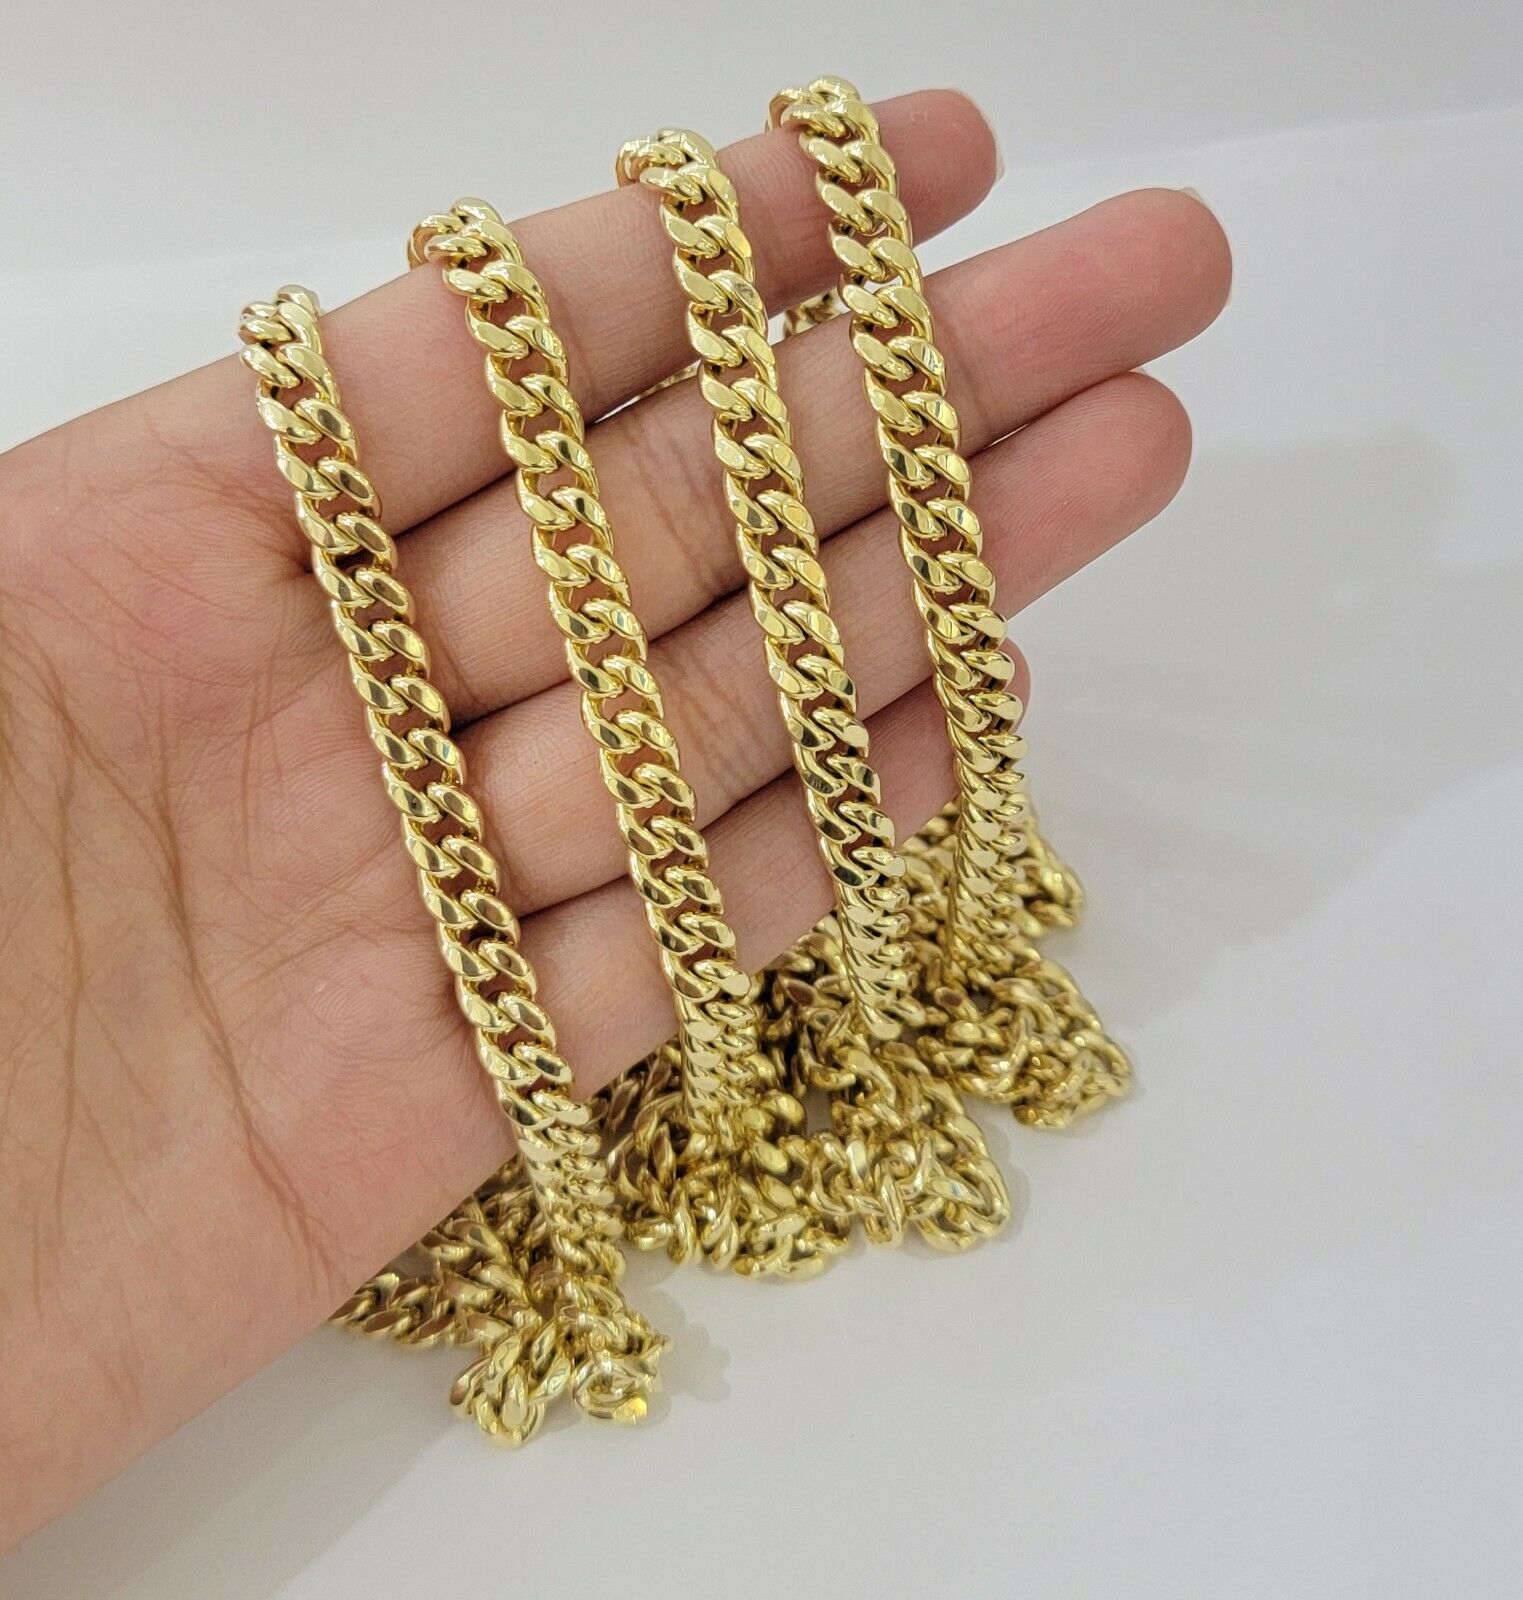 Real Gold Miami Cuban chain Necklace 7mm 24 Inch Lobster ,Men's 10kt Yellow Gold